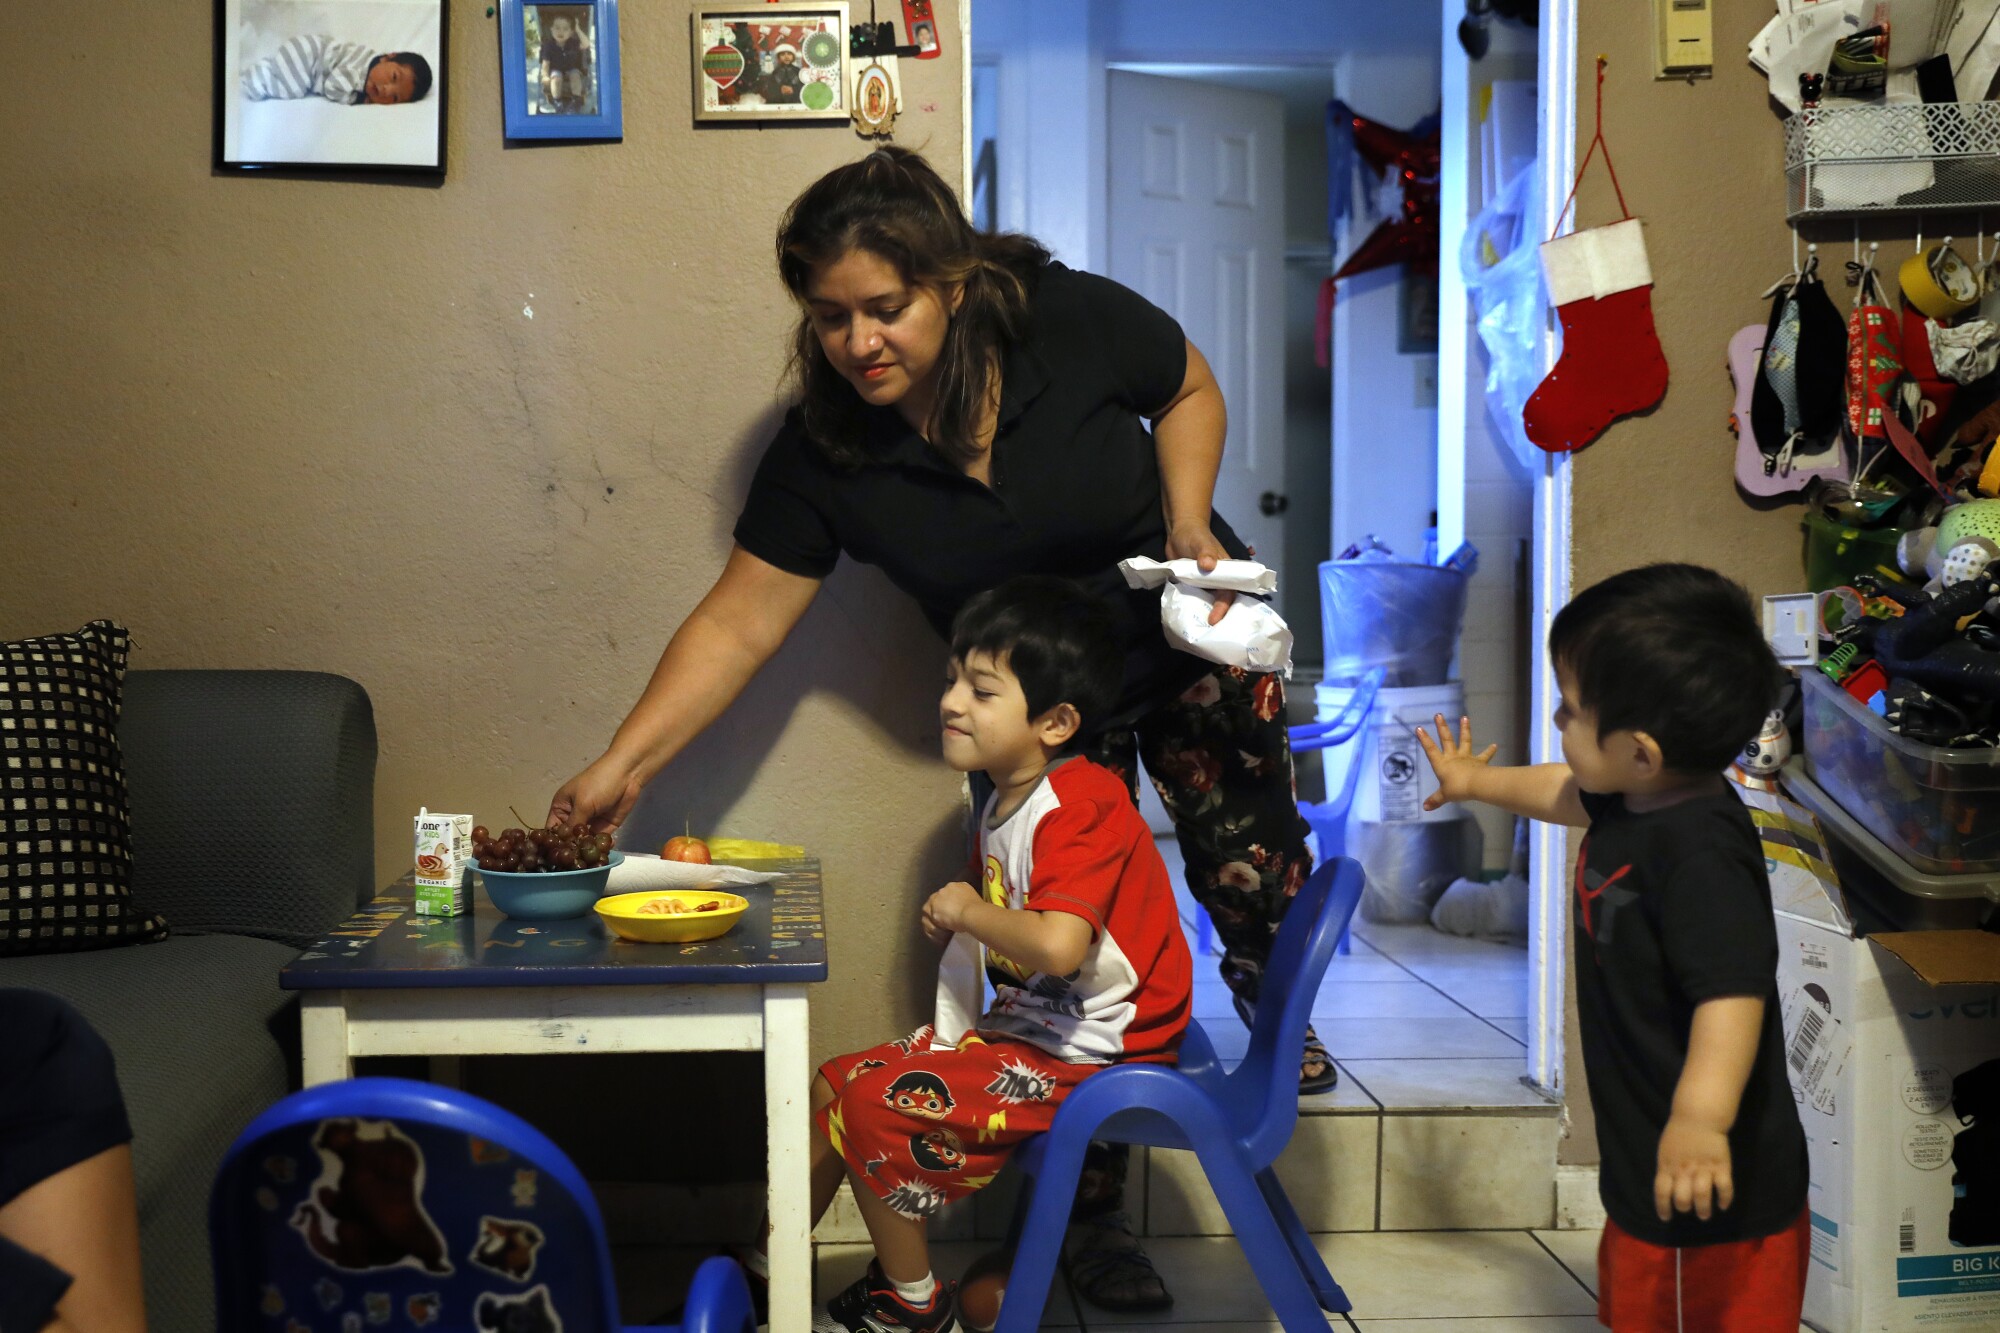 Glenda Valenzuela places snacks on the children's table as Daniel and Alfredo look on.